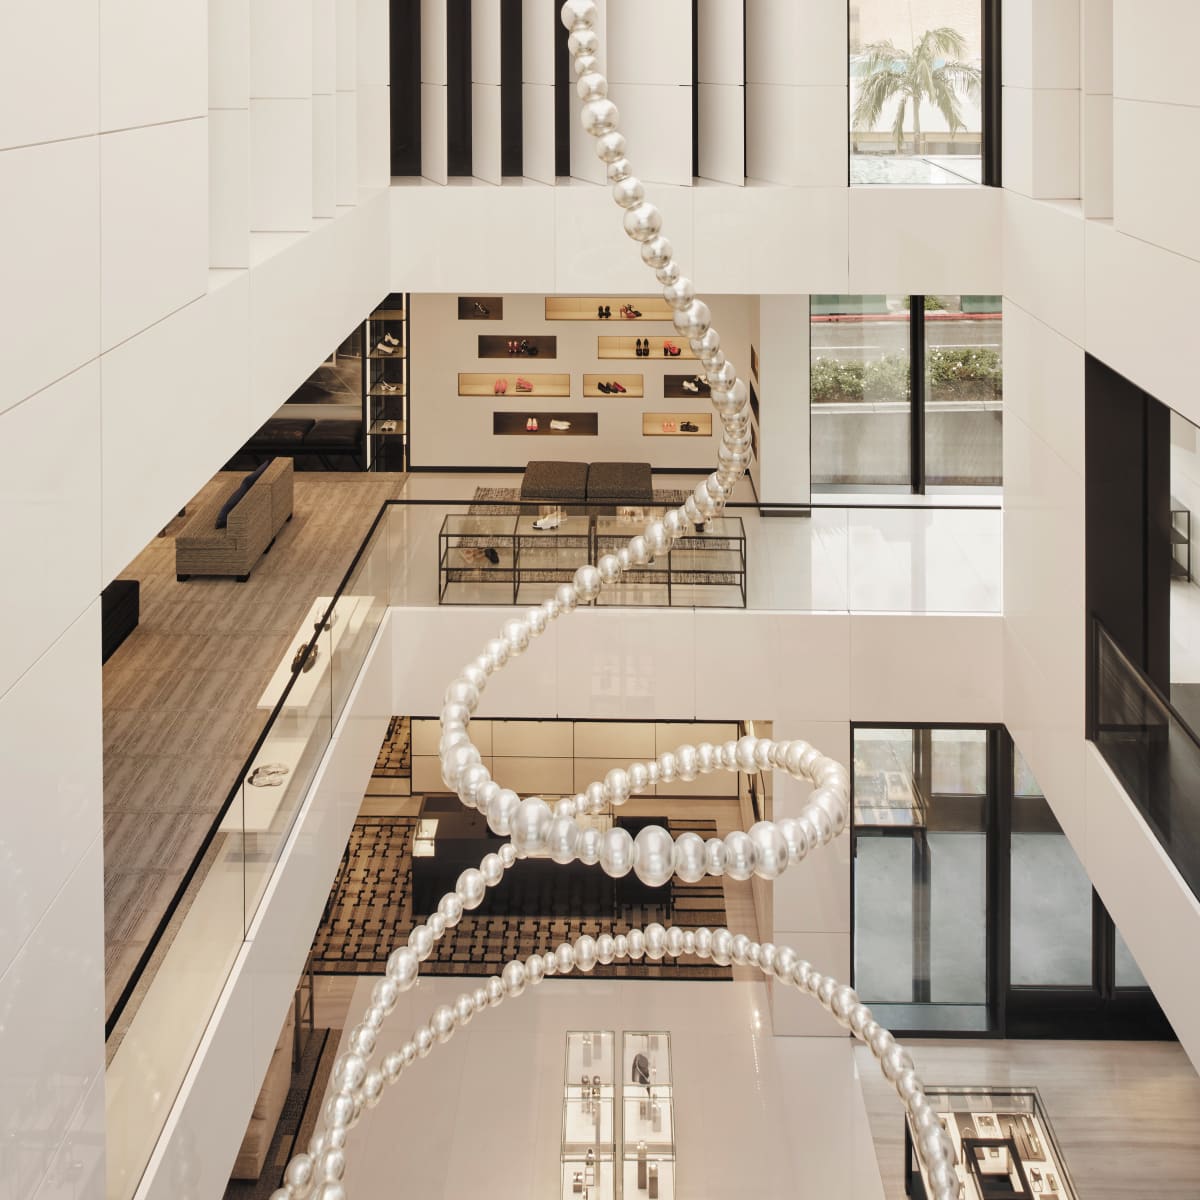 Architect Peter Marino on his new Chanel townhouse boutique